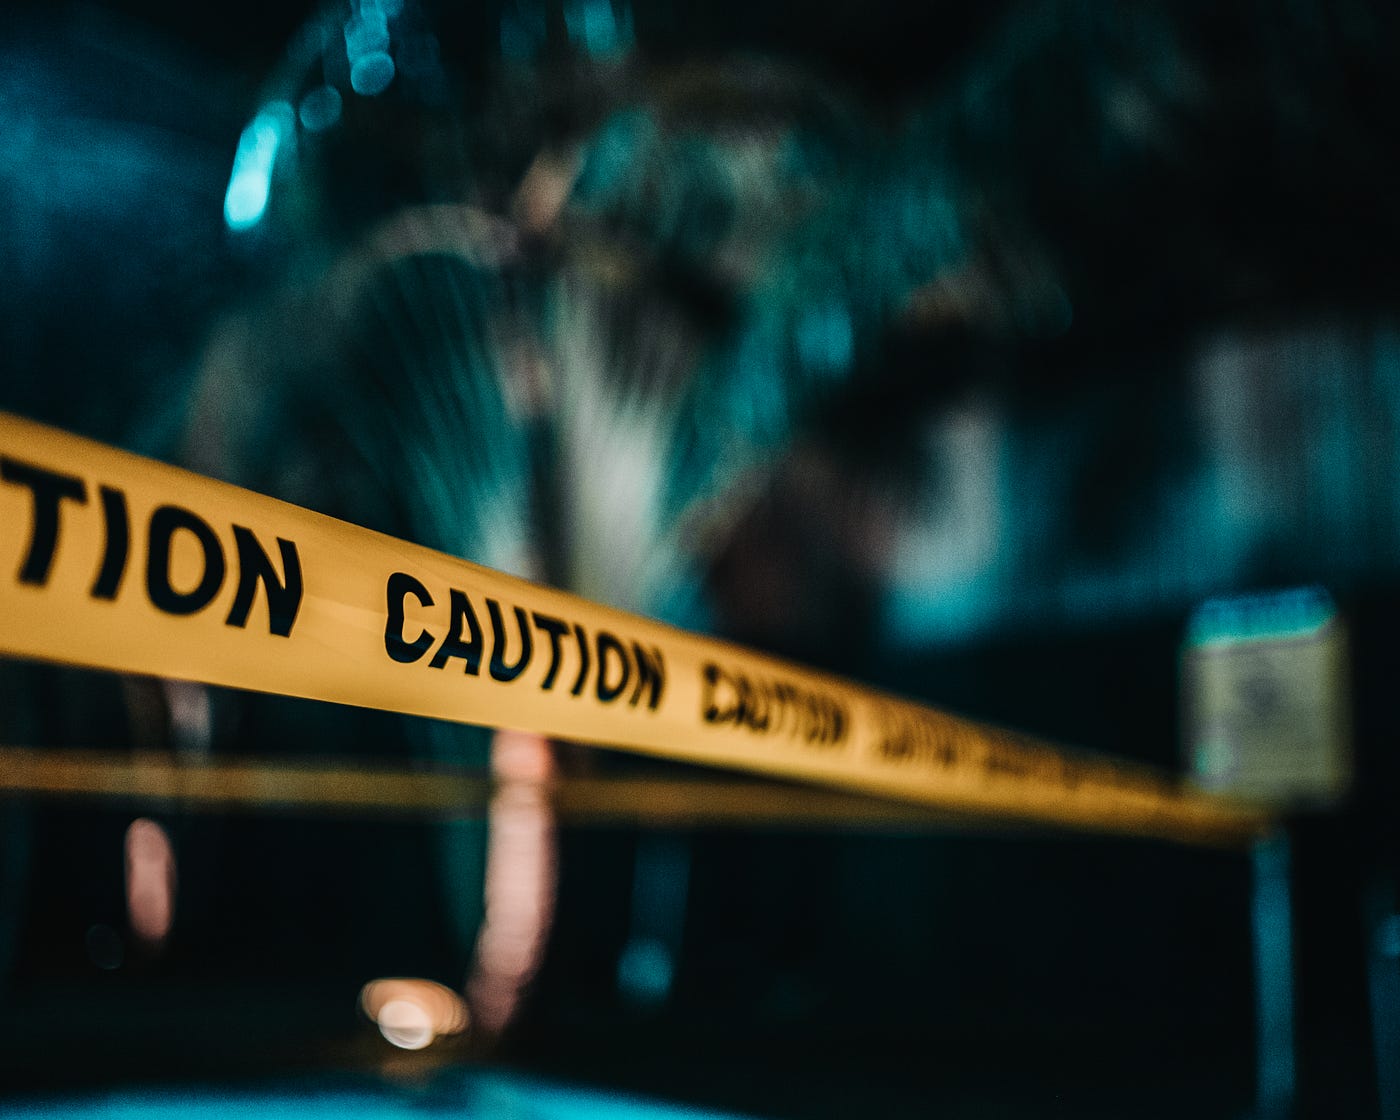 Caution tape, yellow with black letters, spans the horizontal widdth of this otherwise blurred image.